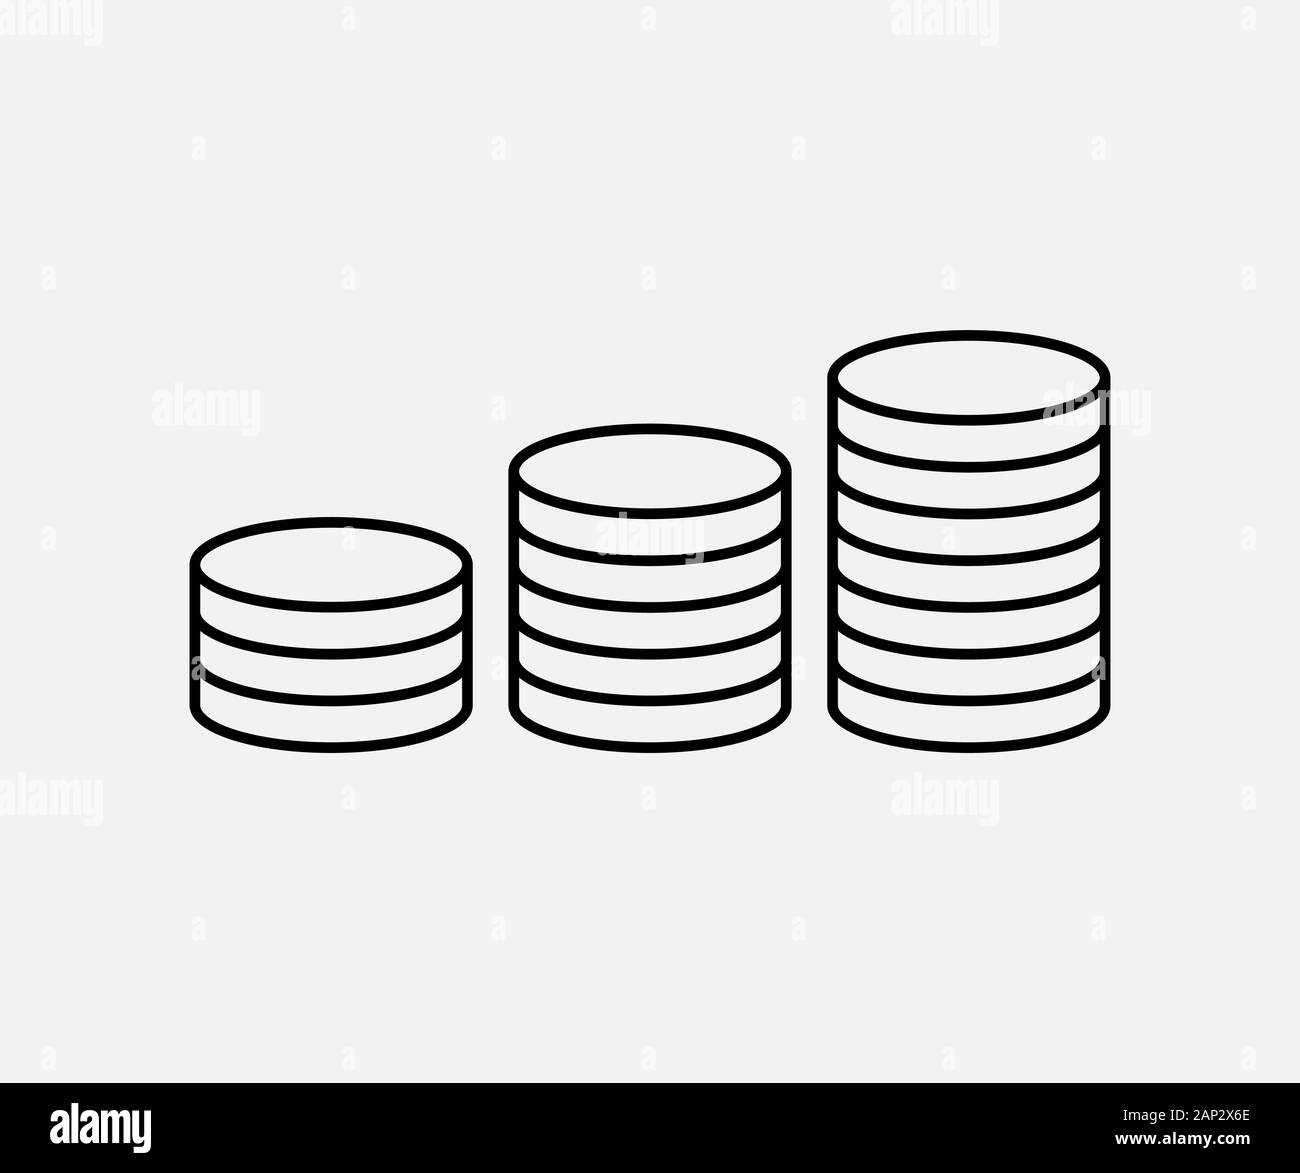 Coins stack, money icon. Vector illustration, flat design. Stock Vector